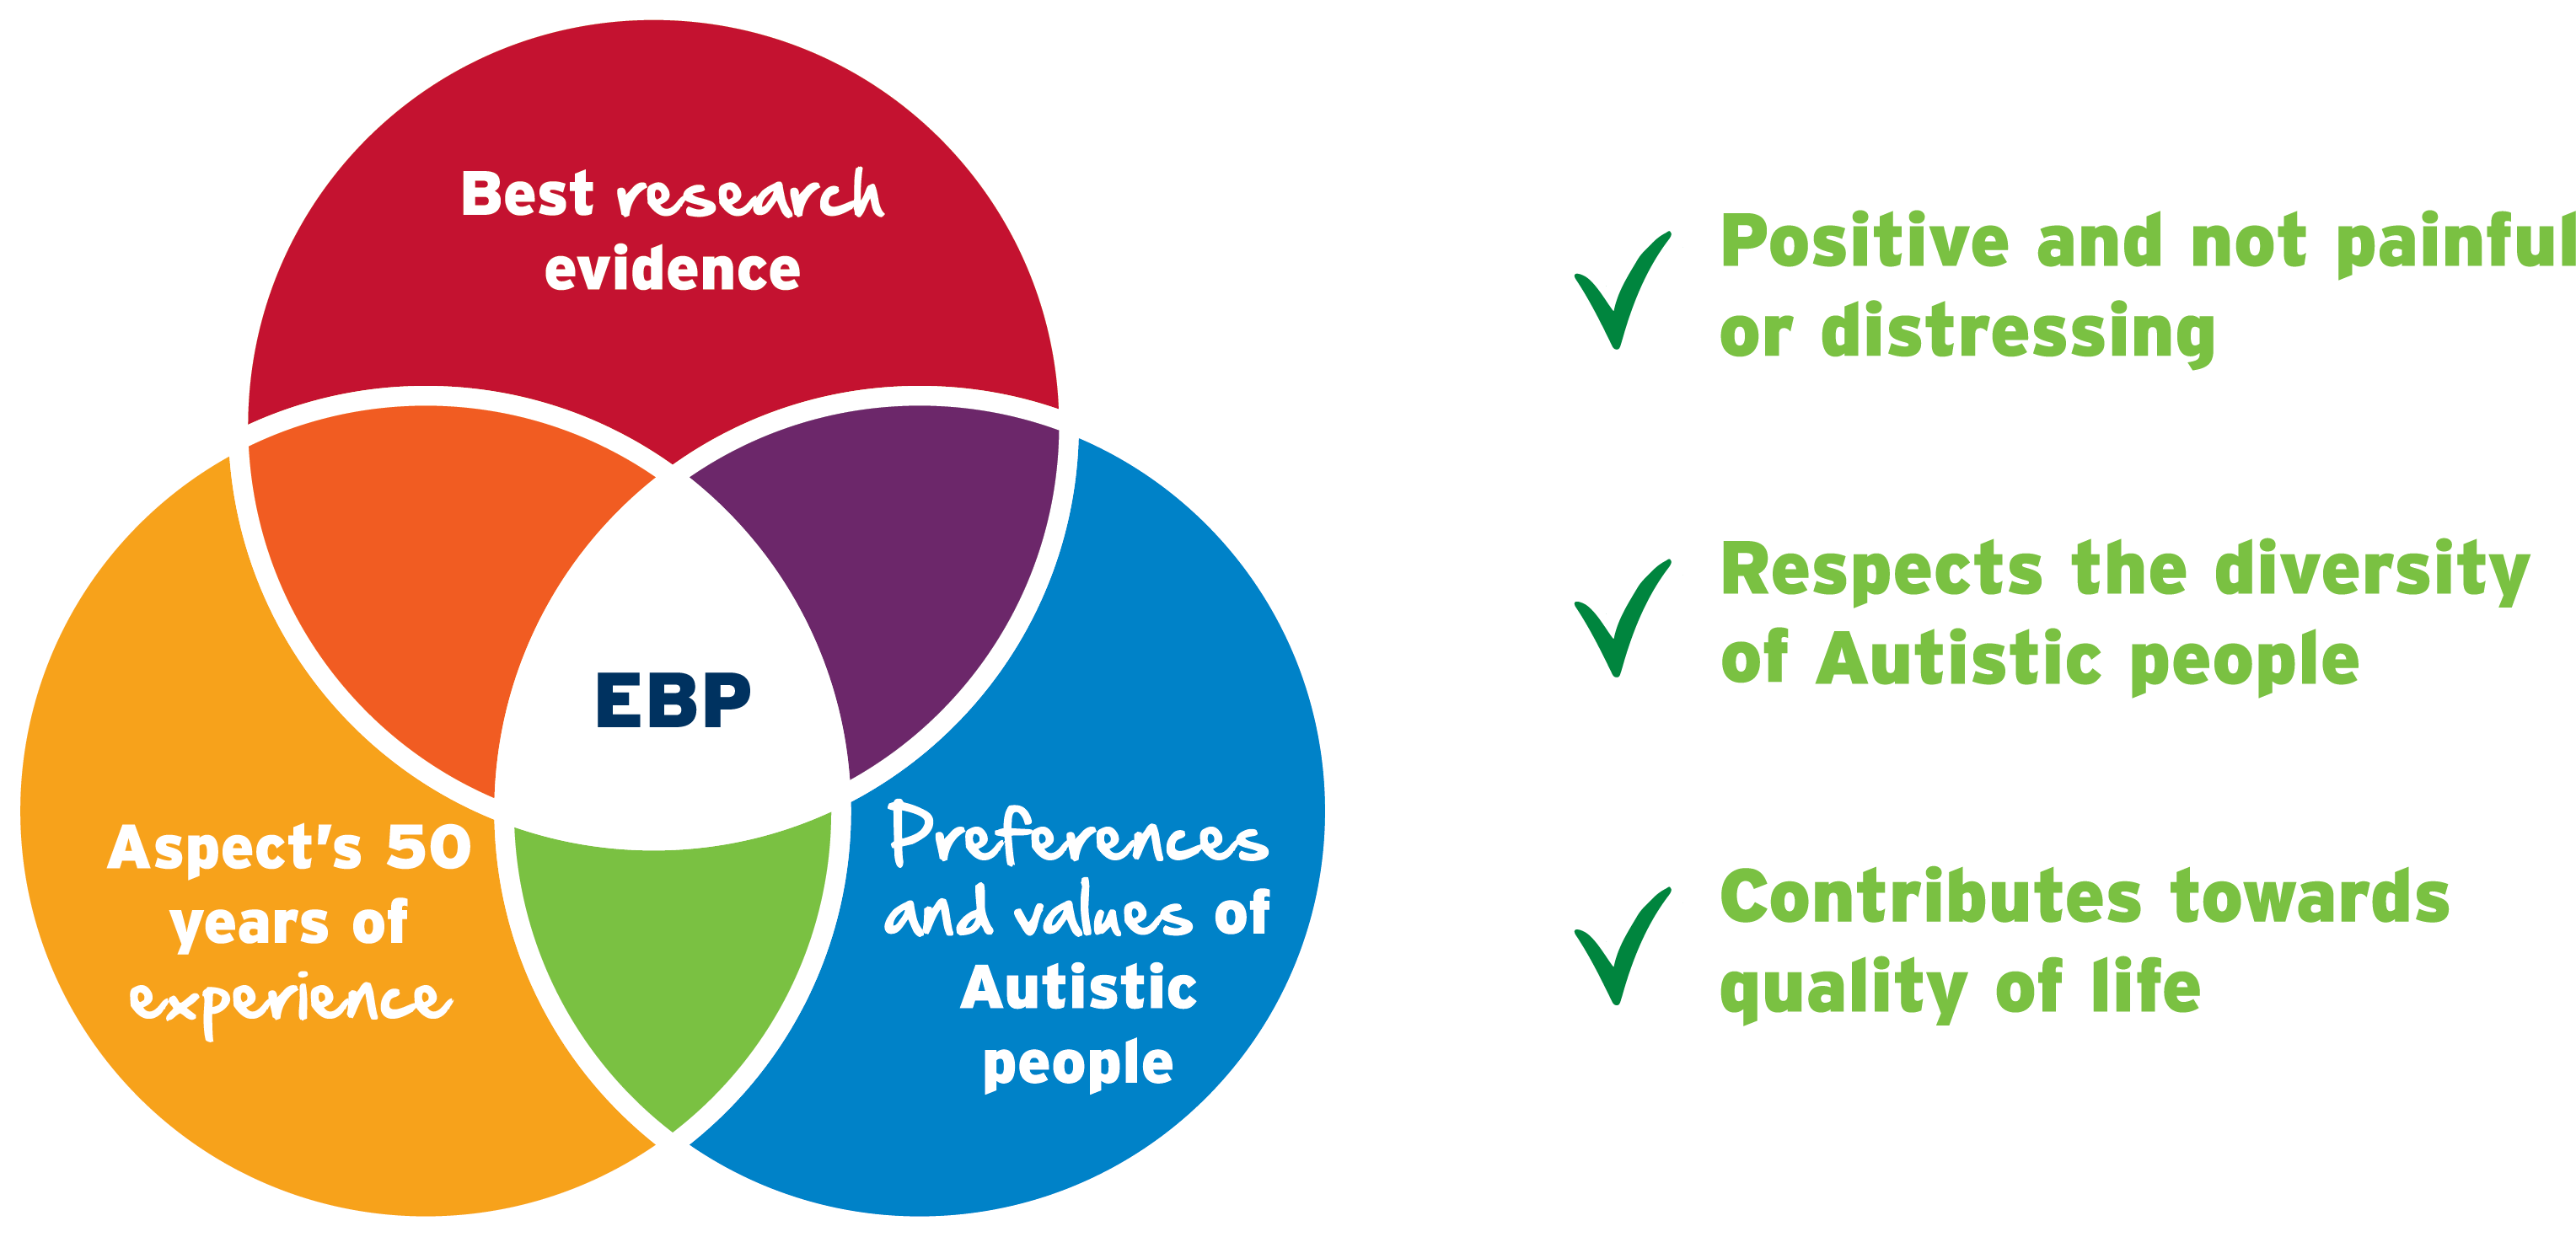 What is Evidence Based Practice at Aspect?